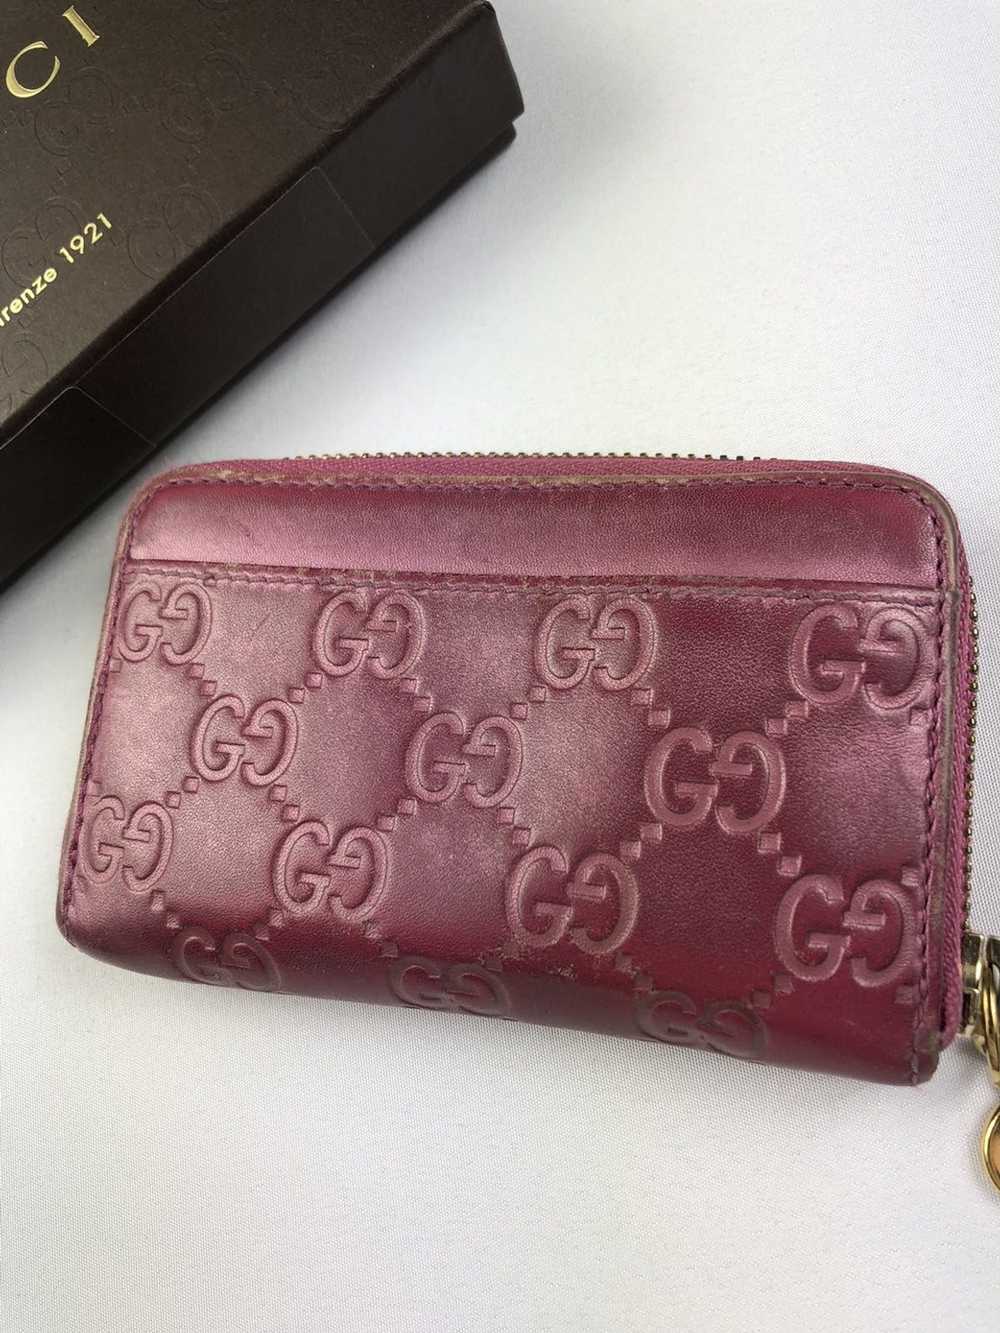 Gucci Gucci gg guccissima leather cles wallet - image 2